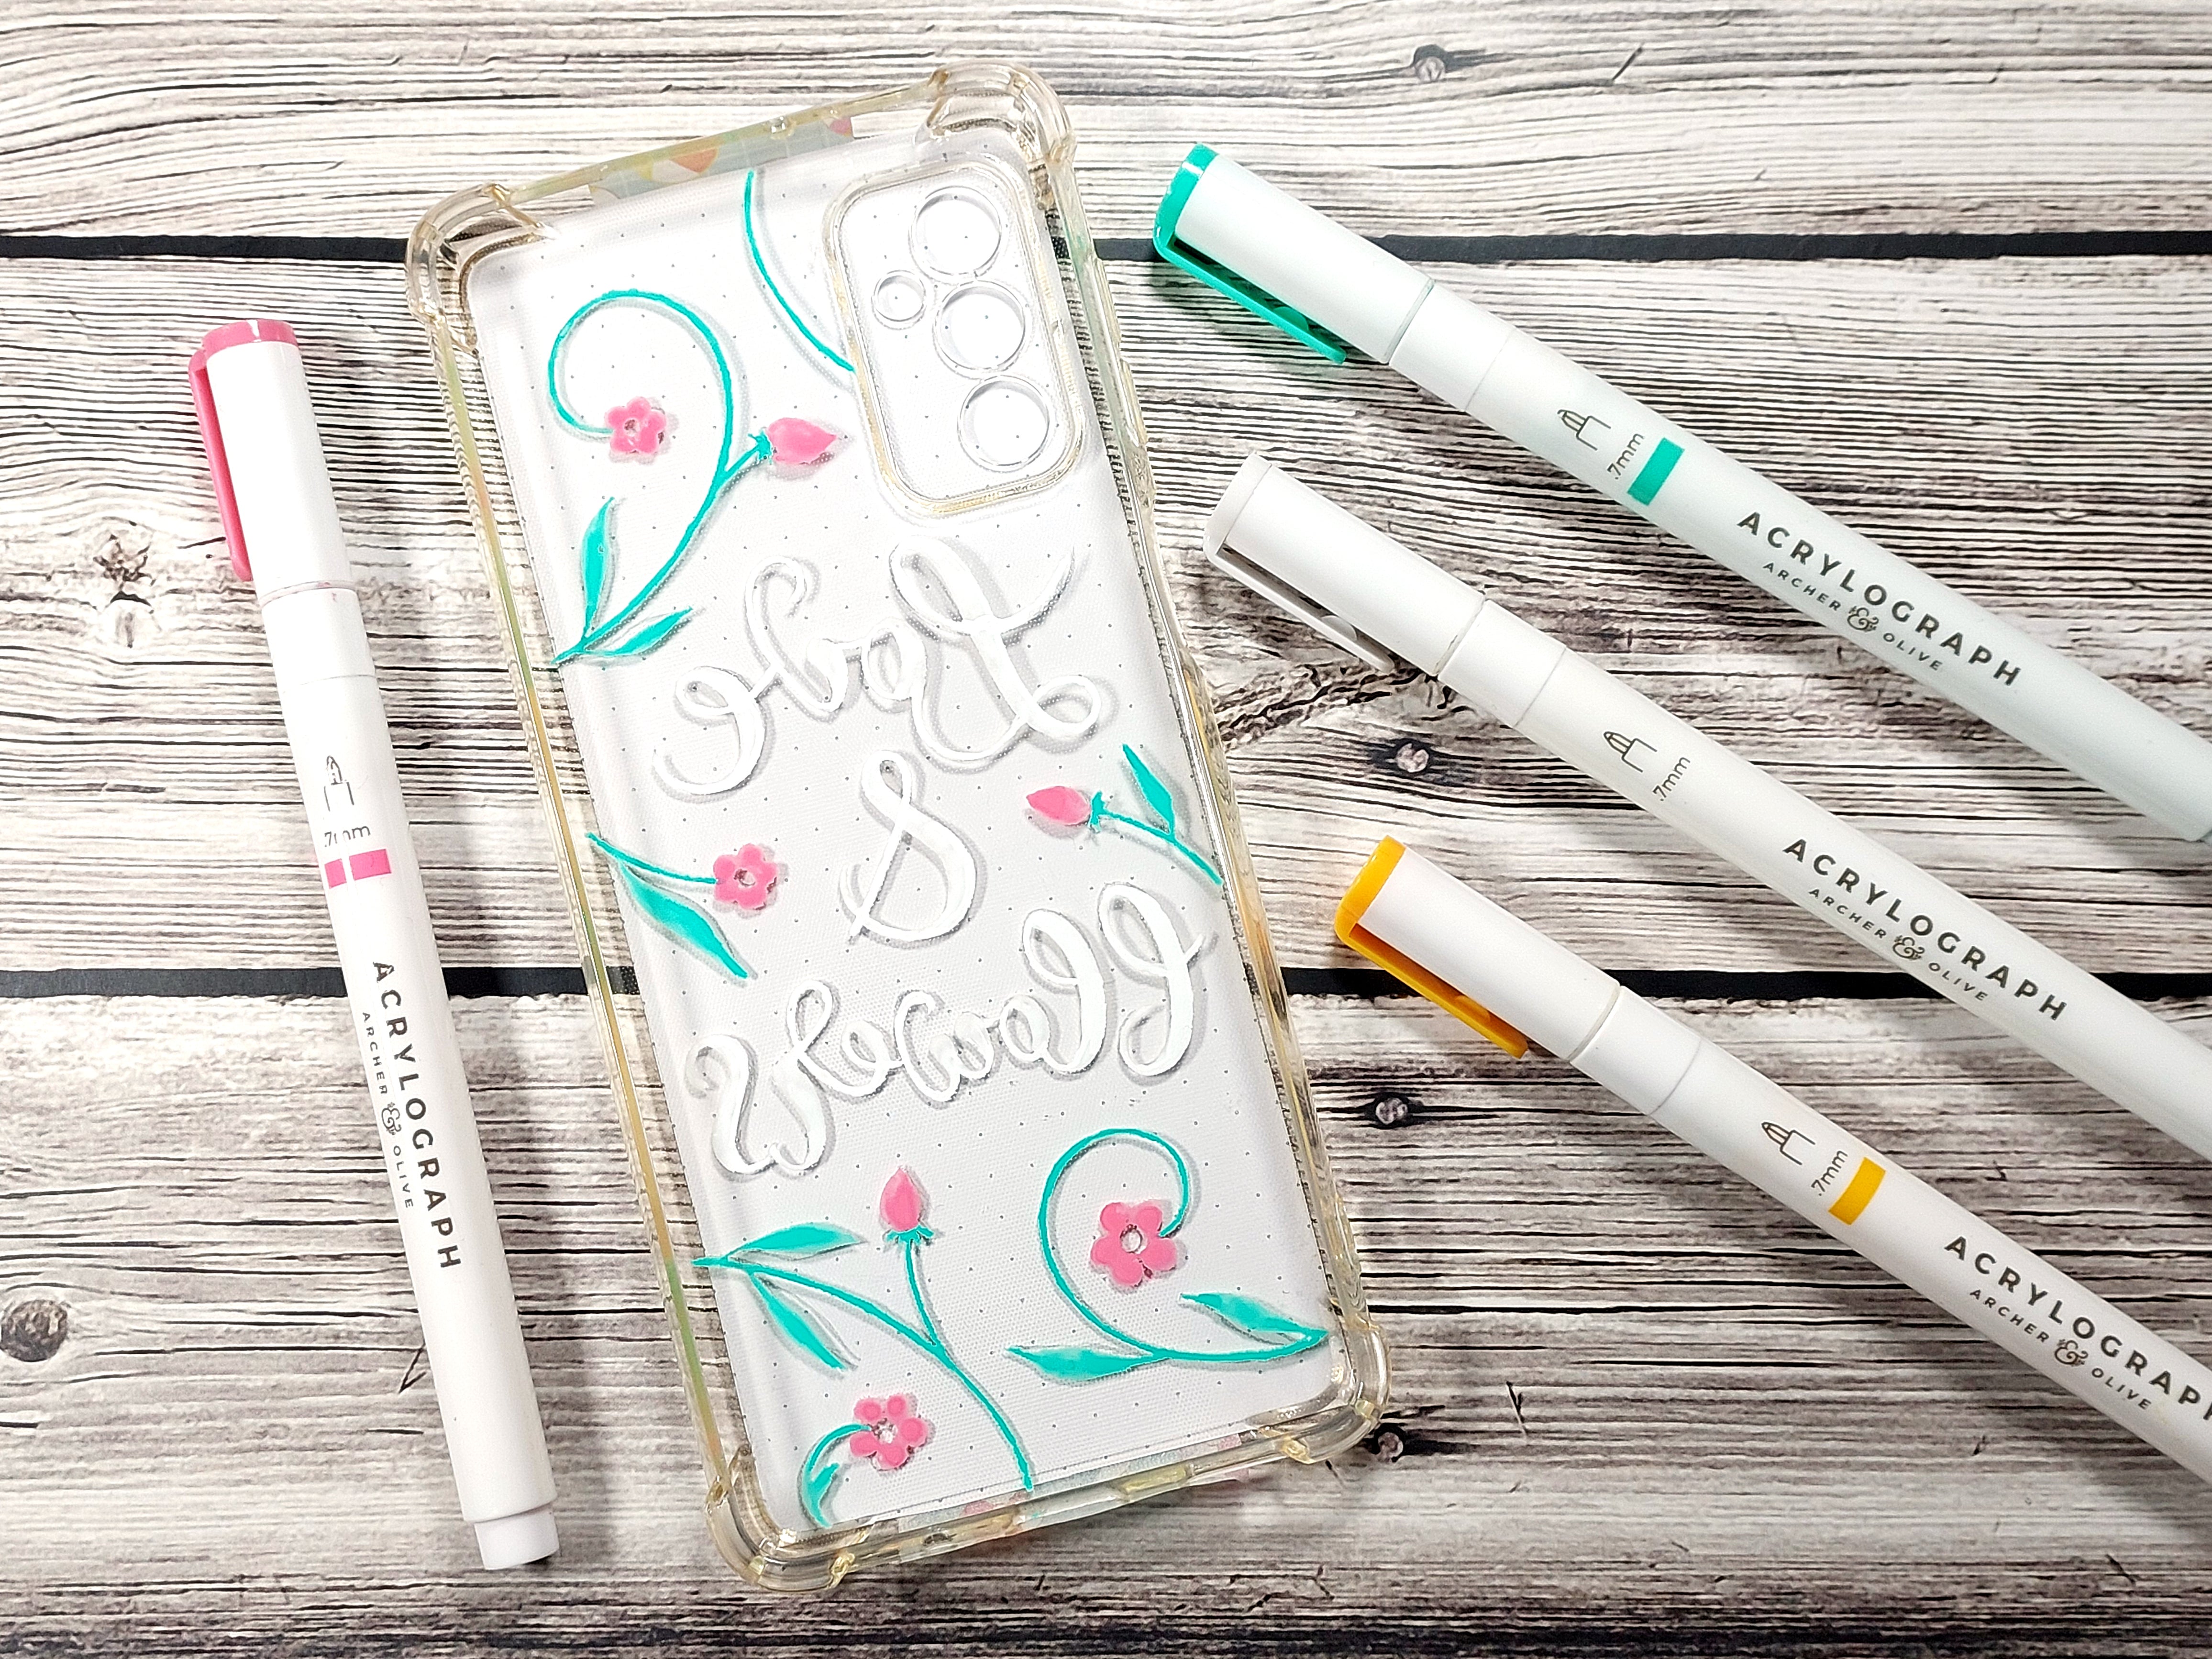 Lettering, stems and petals painted on the phone case